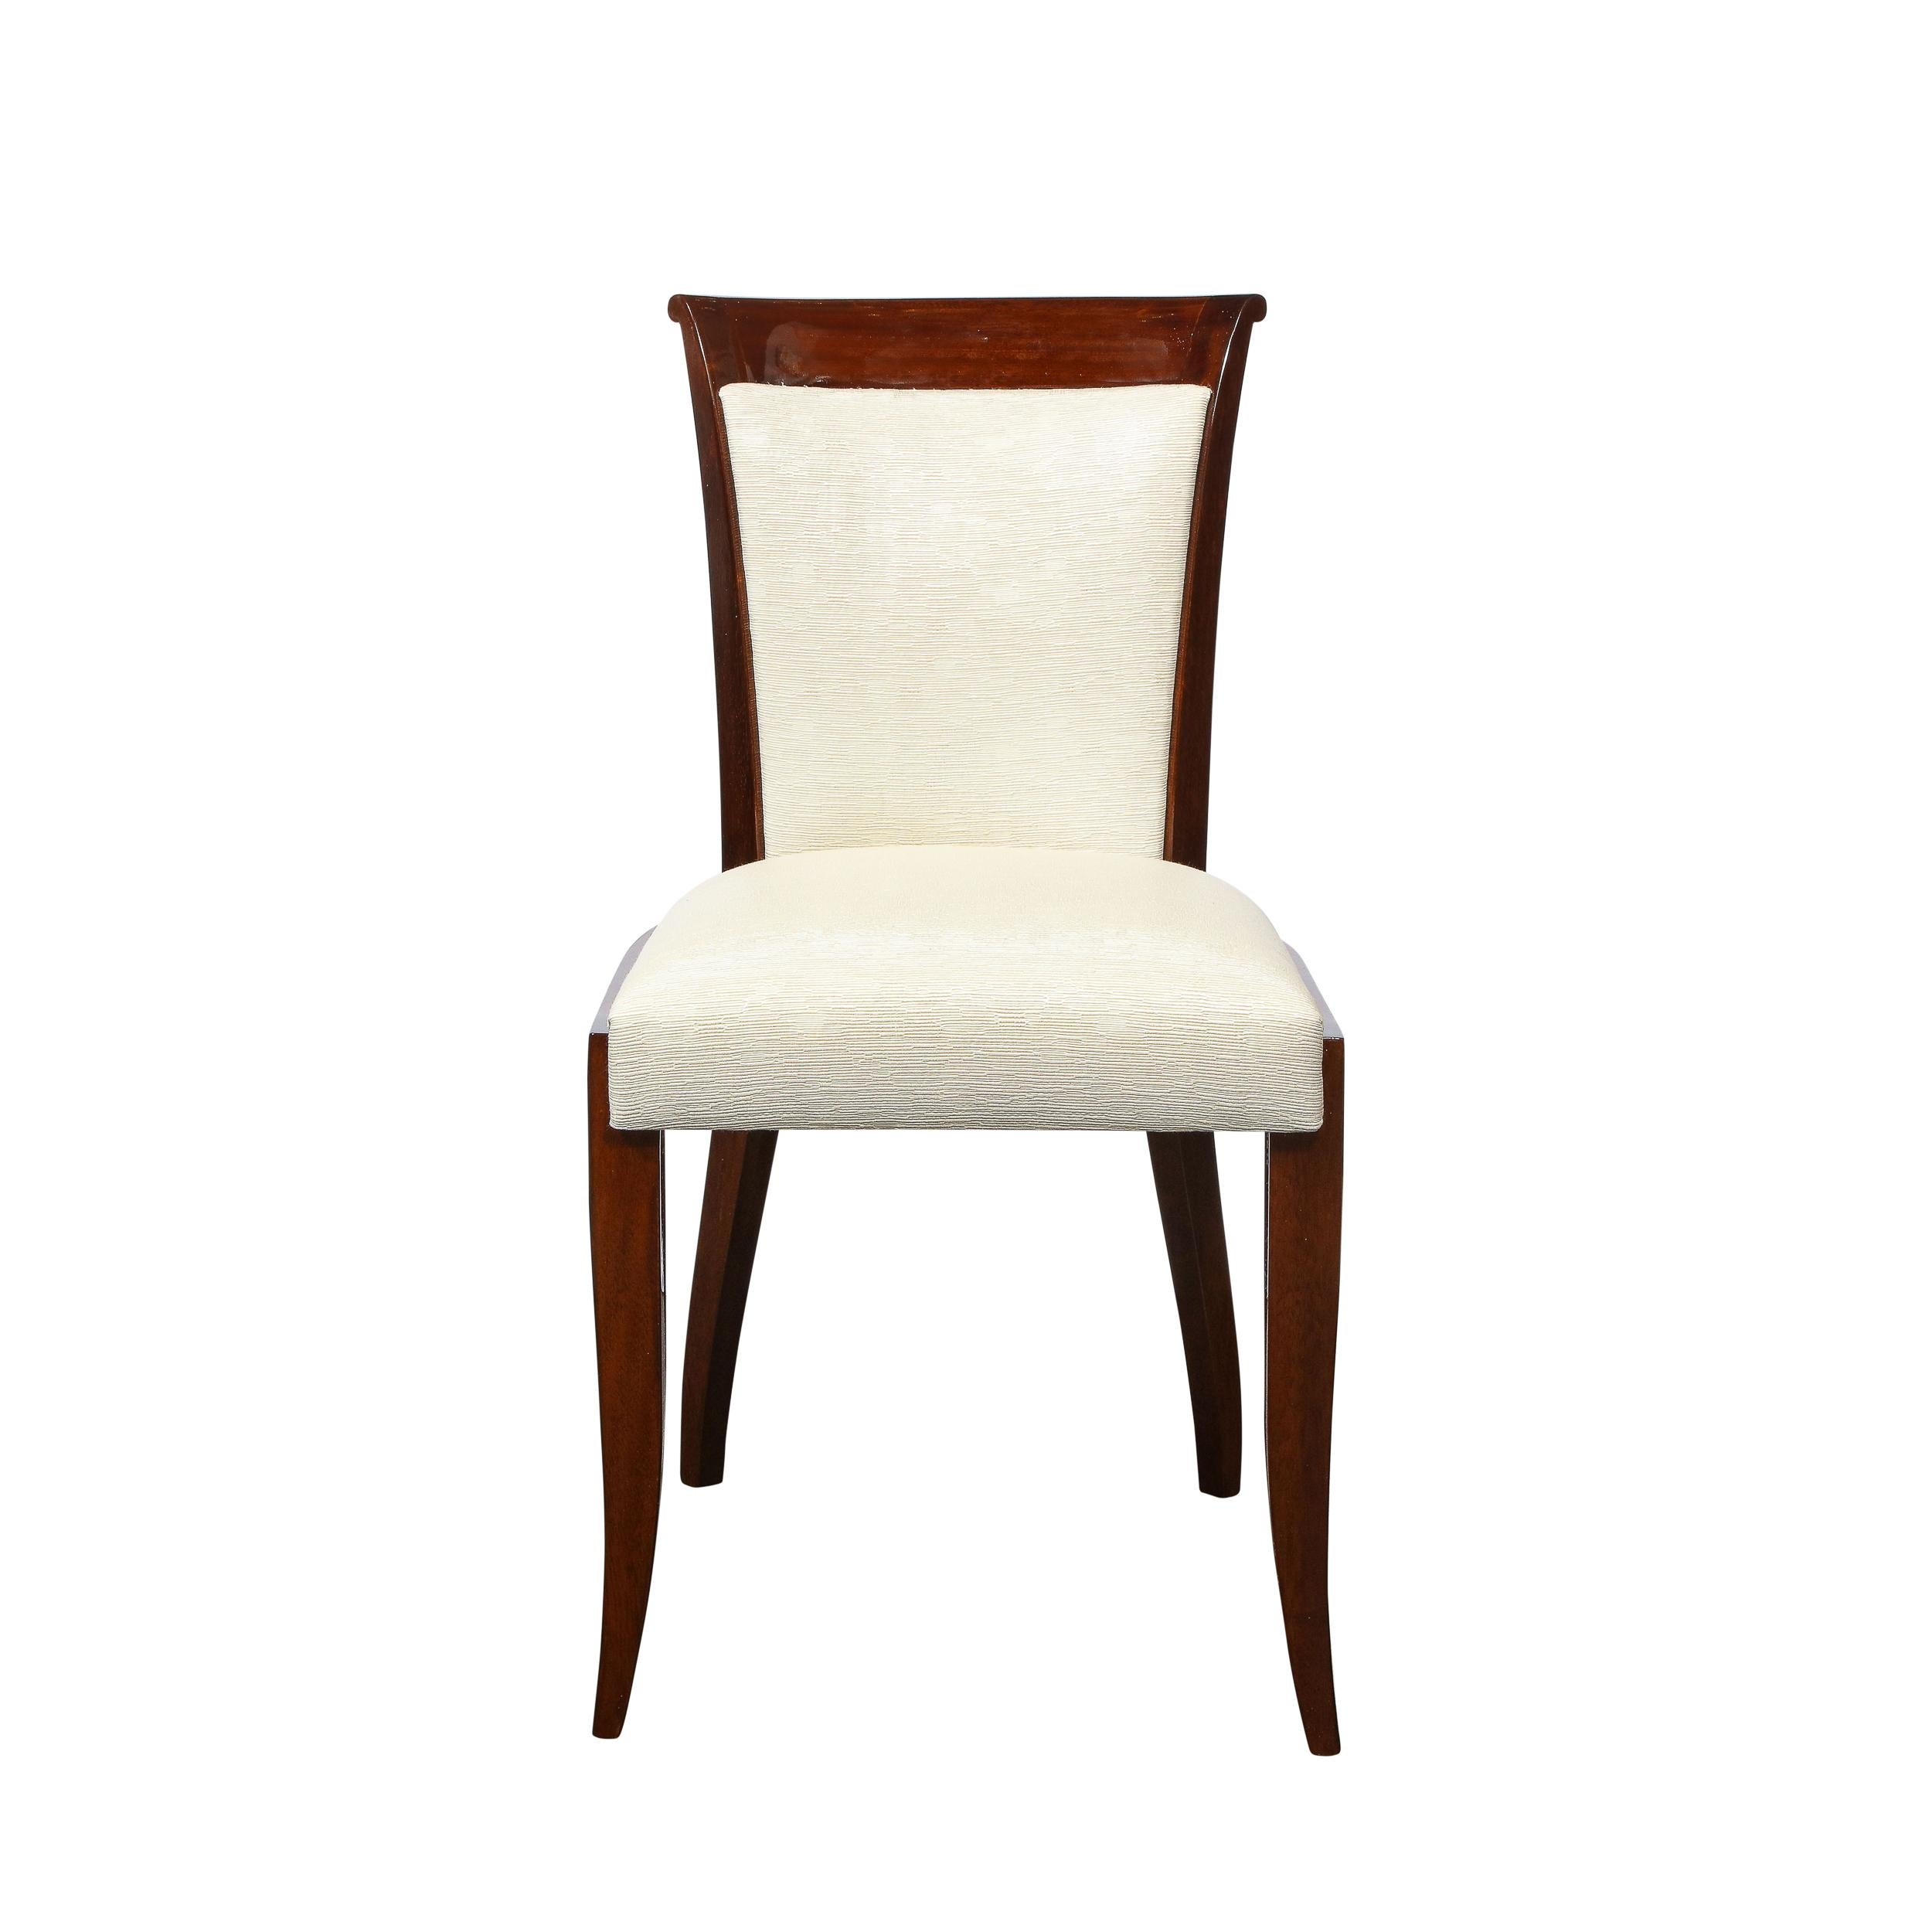 This elegant set of eight Art Deco dining chairs were realized in France circa 1930. They feature walnut frames with subtle hour back form backs with slightly cantilevered tops; stylized klismos style feet; and newly upholstered backs and seats in